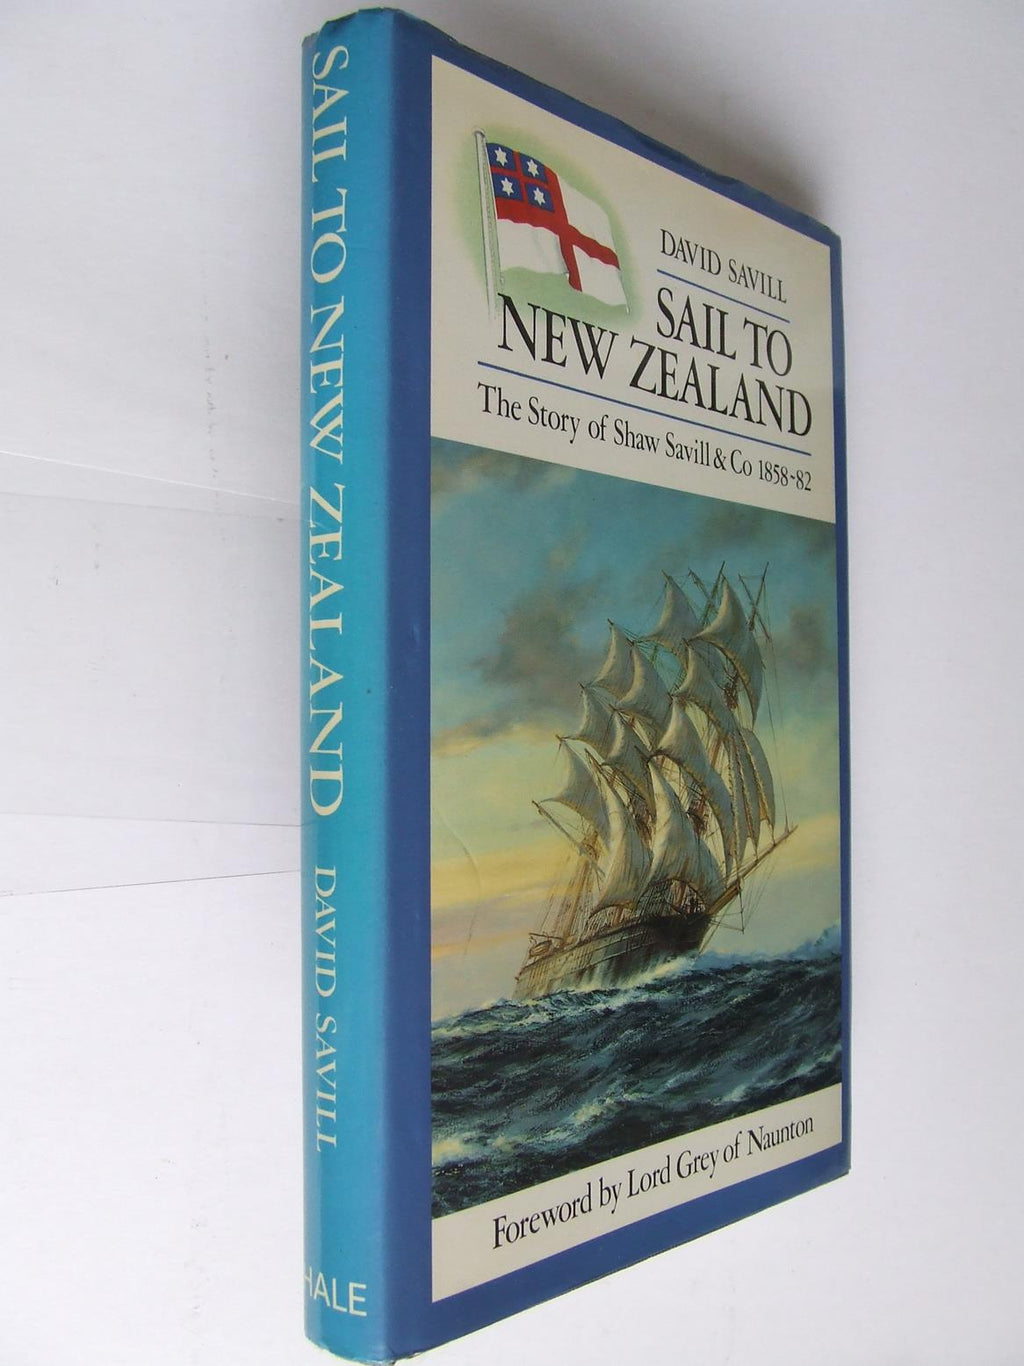 Sail to New Zealand. the story of of Shaw Savill & Co. 1858 - 1882